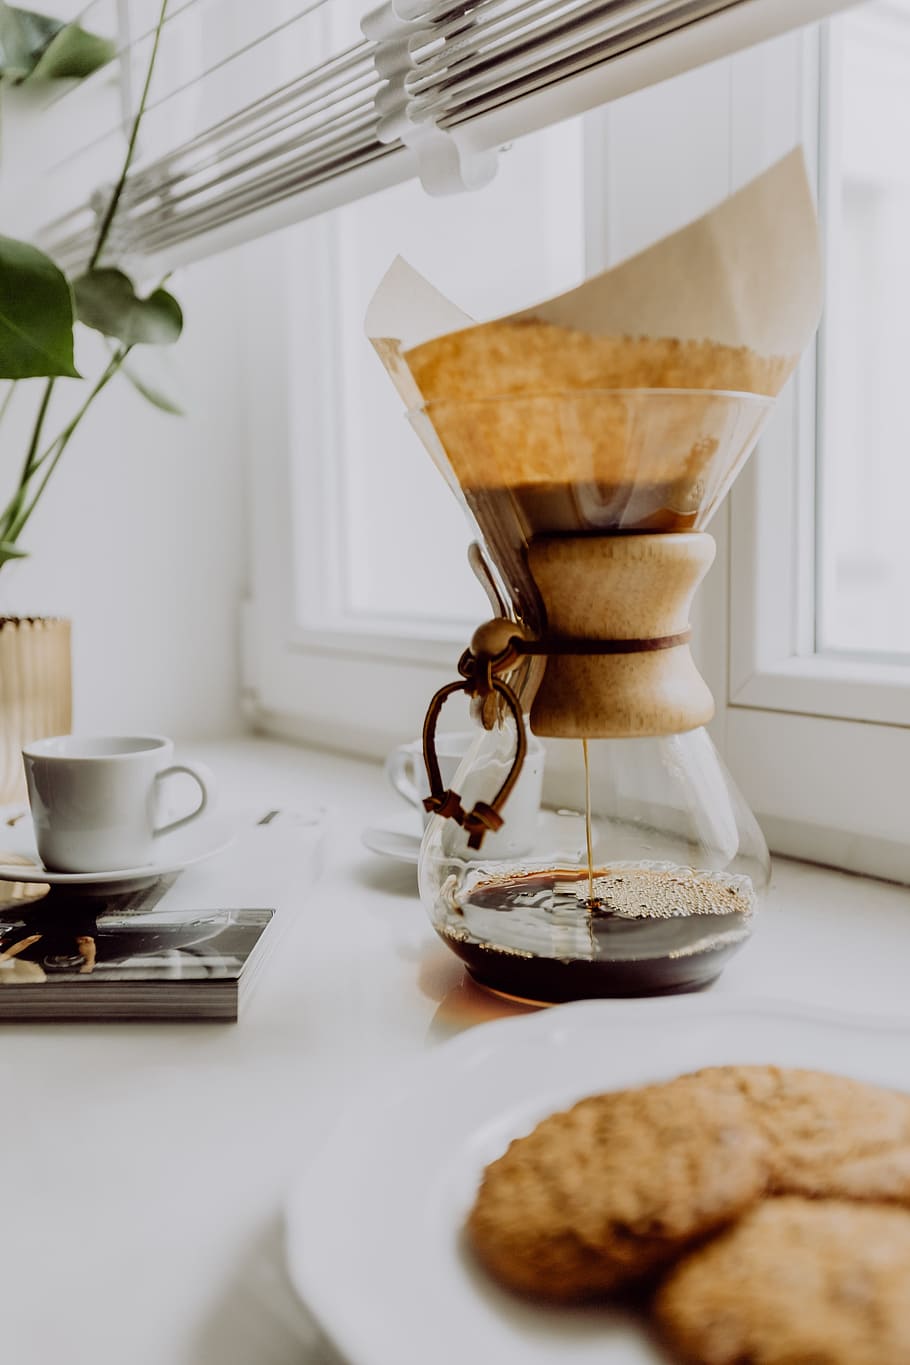 Brewing third wave coffee with Chemex, morning, cups, coffeemaker